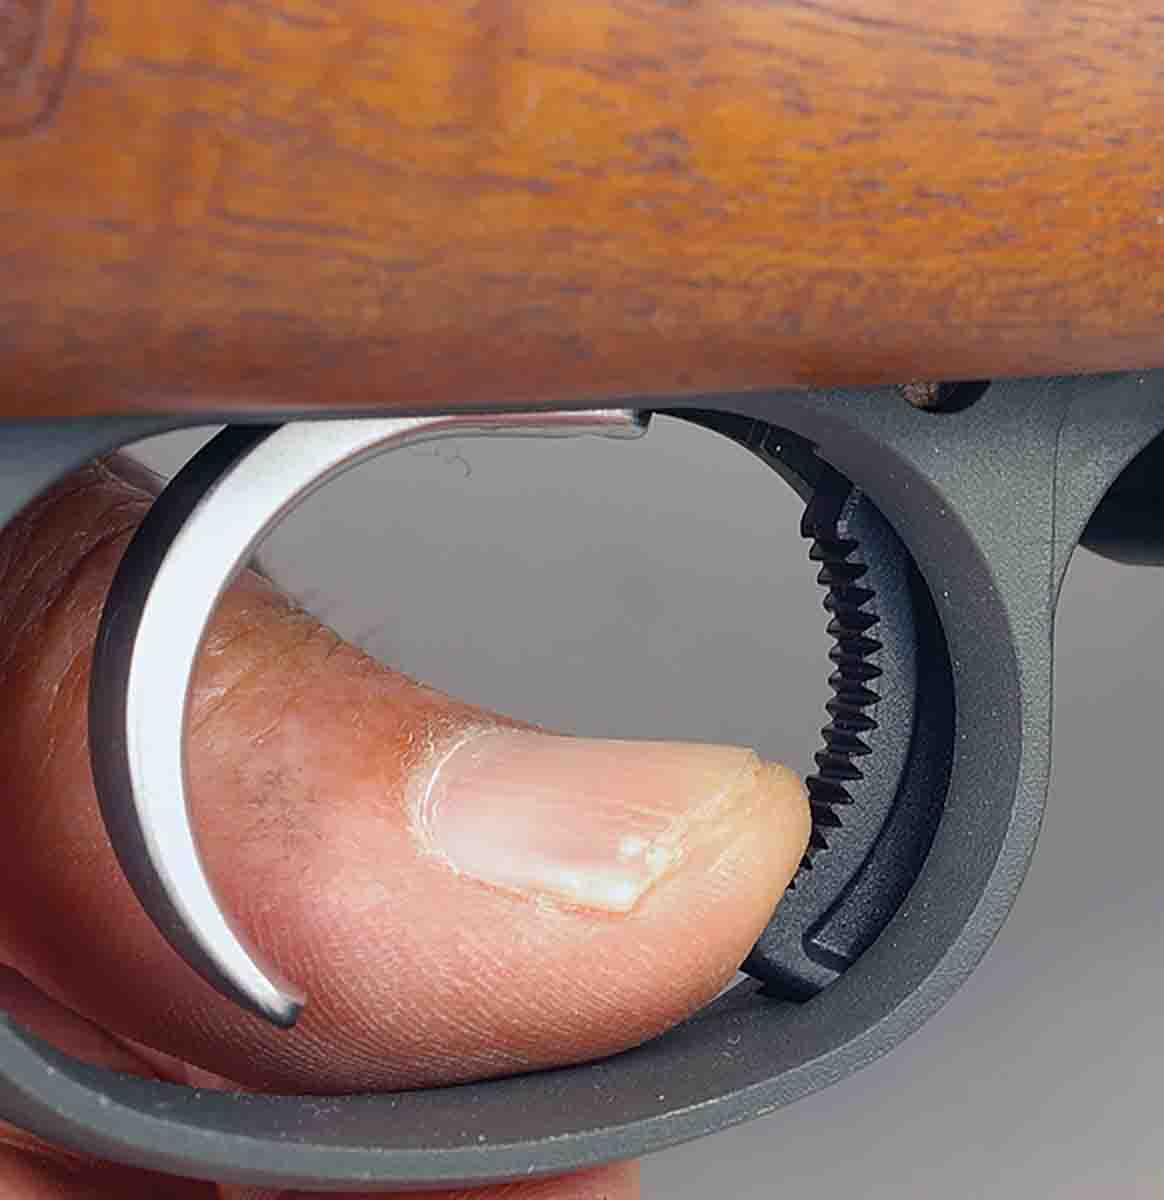 The 557’s magazine release lever is located inside the trigger bow.